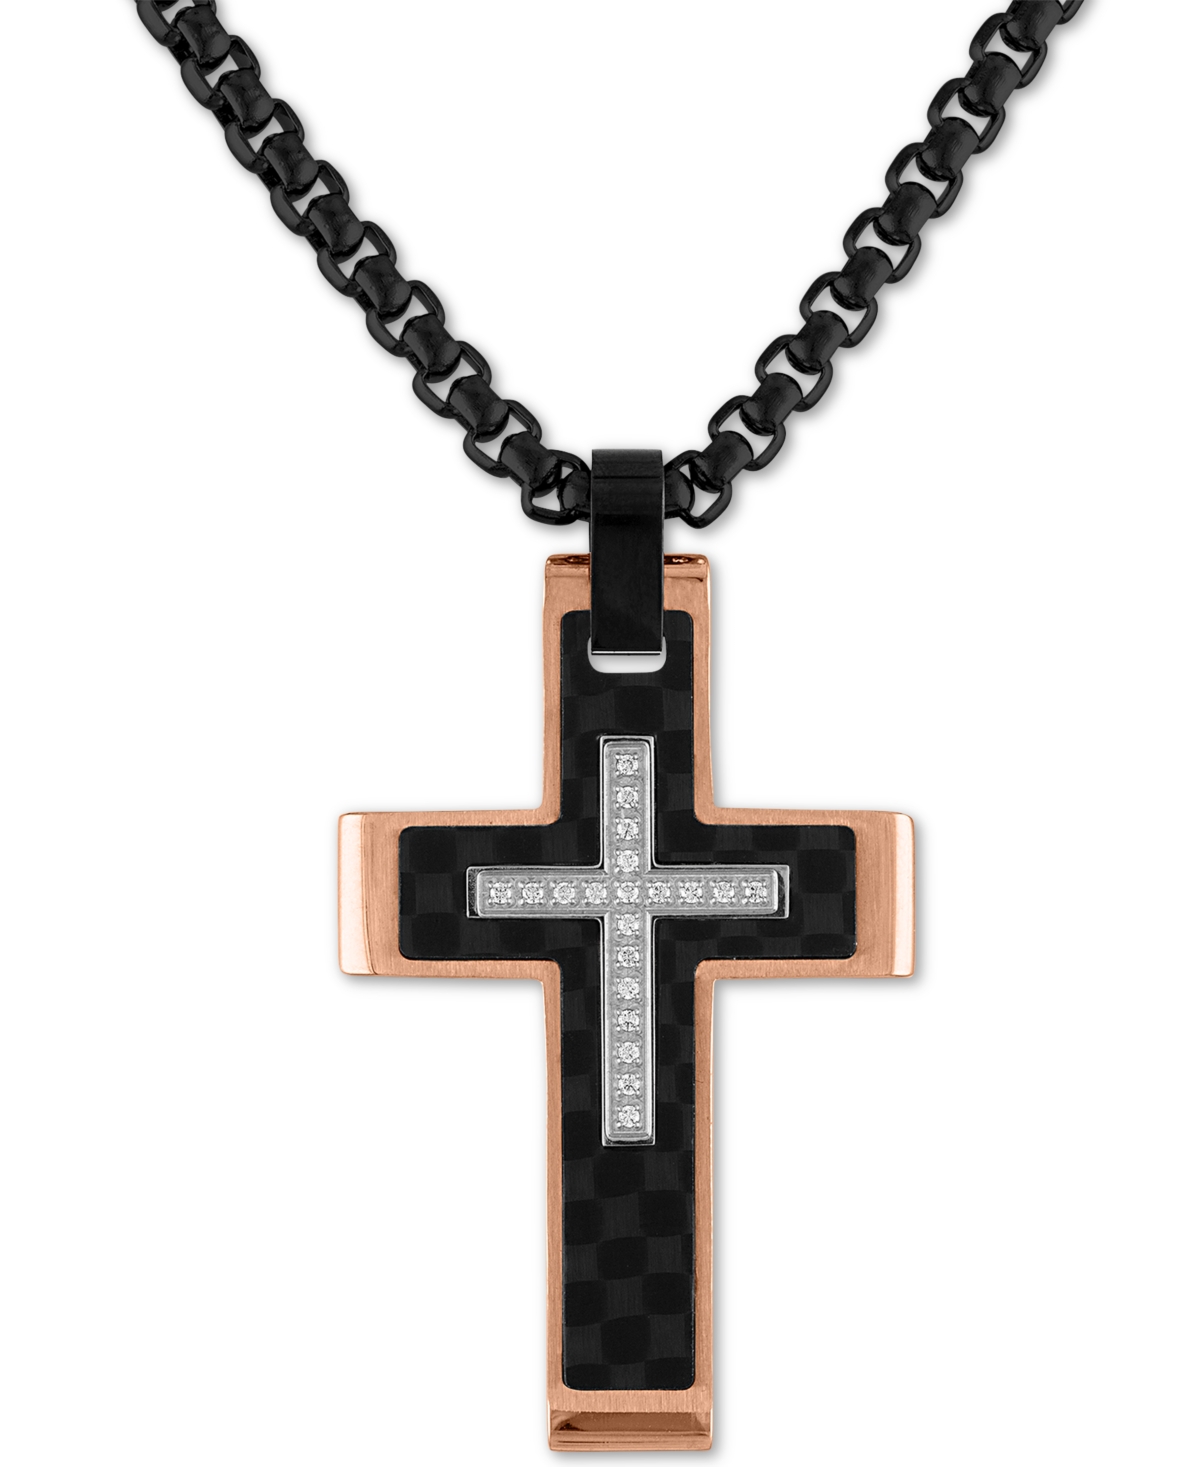 Esquire Men's Jewelry Diamond Cross 22" Pendant Necklace (1/10 ct. t.w.) in Stainless Steel, Black Carbon Fiber, Created for Macy's